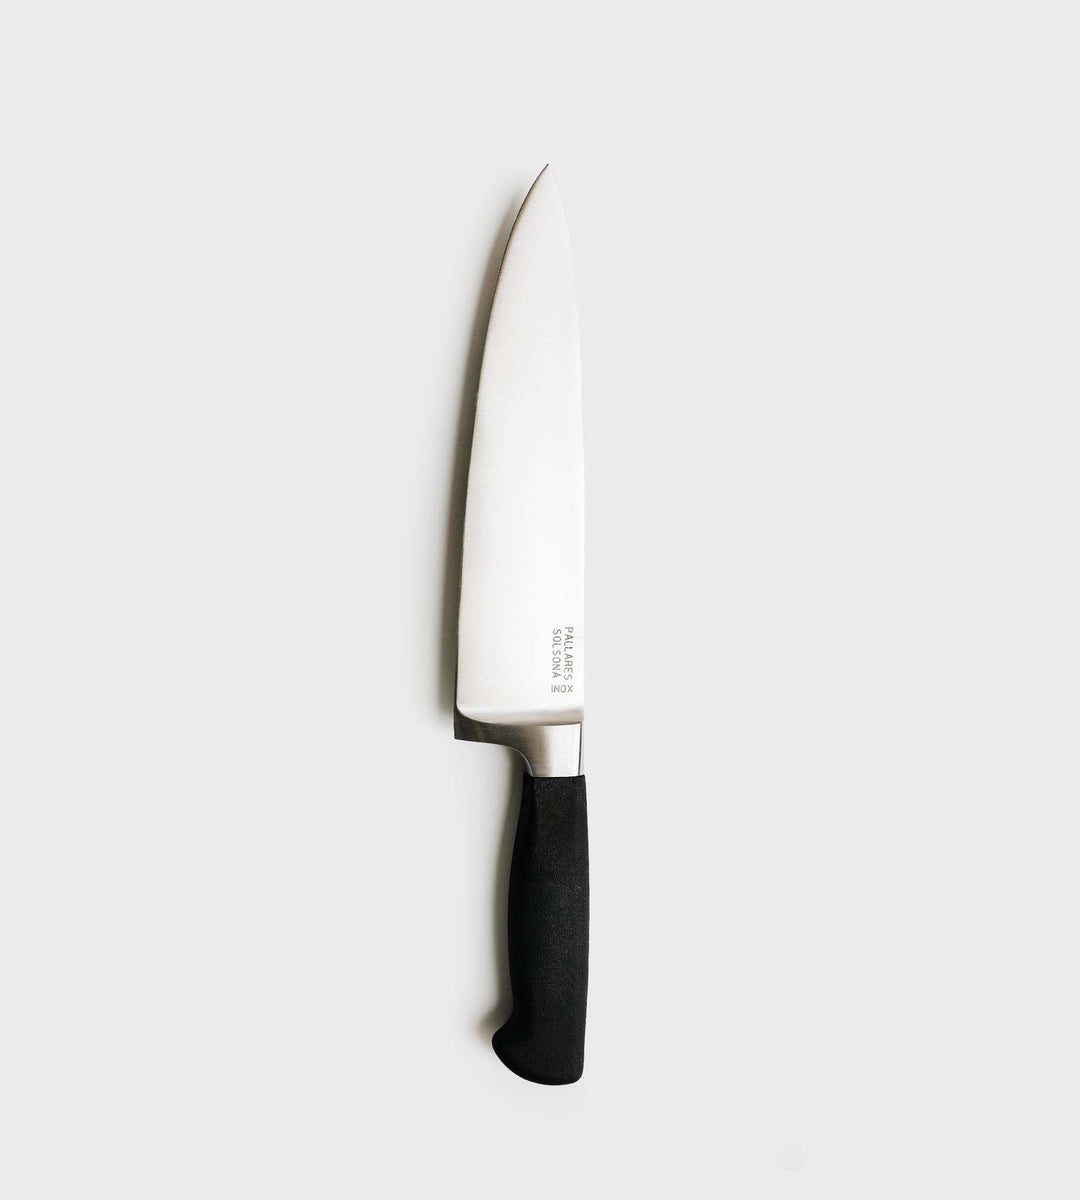 Pallares | Chef's Professional Knife | 20cm Stainless Steel Blade